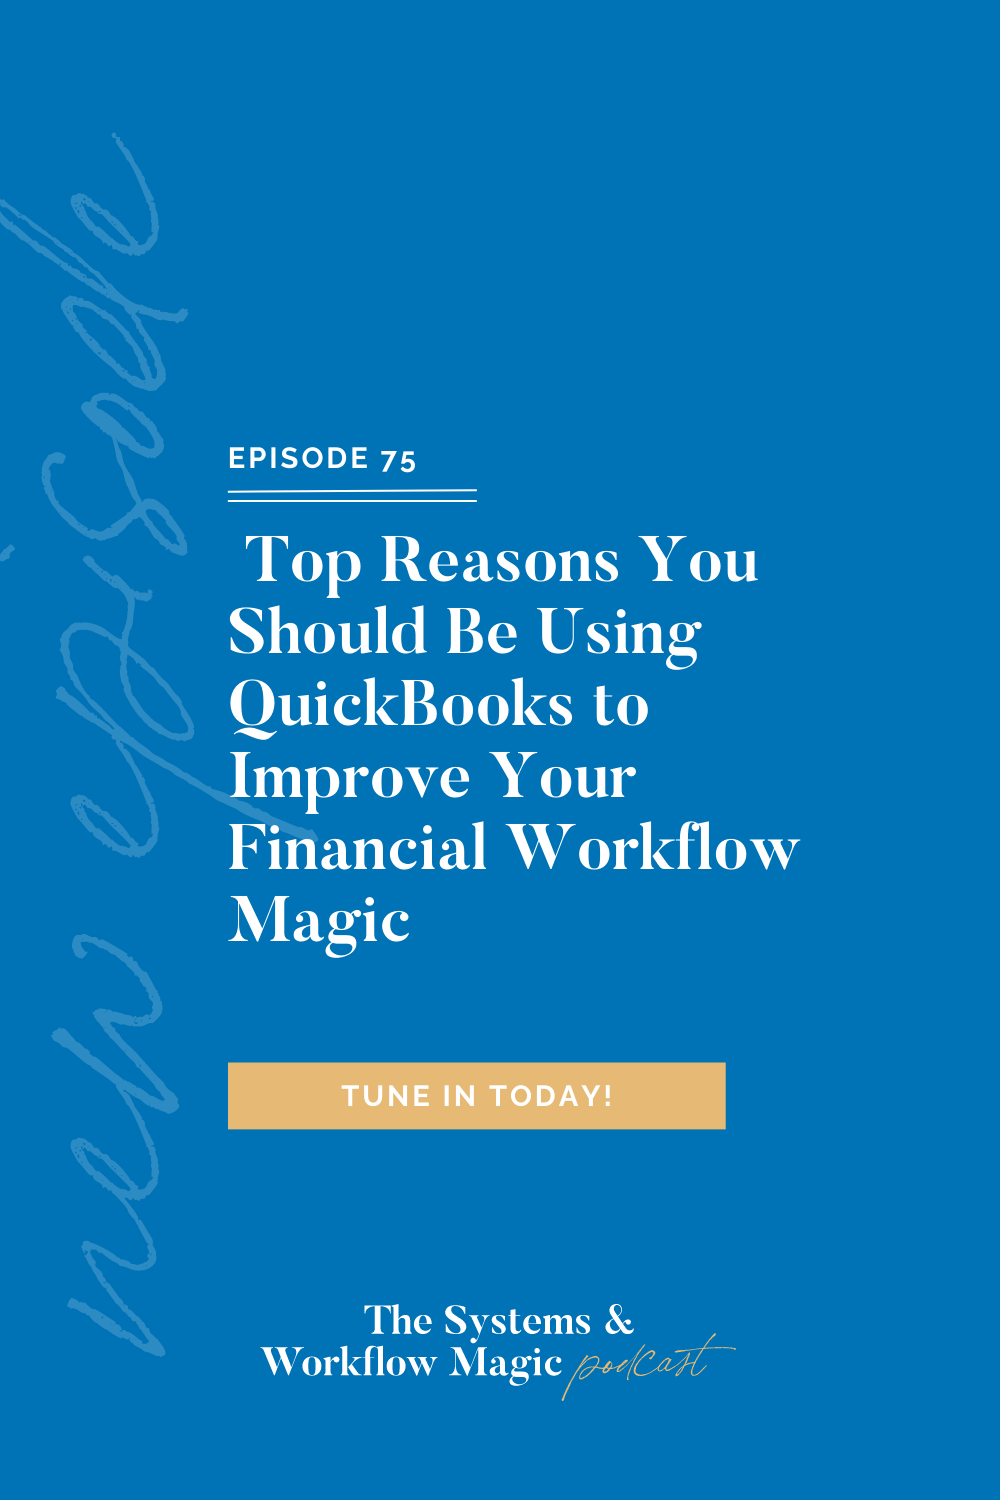 75-top-reasons-you-should-be-using-quickbooks-to-improve-your-financial-workflow-magic-with-crystalynn-shelton